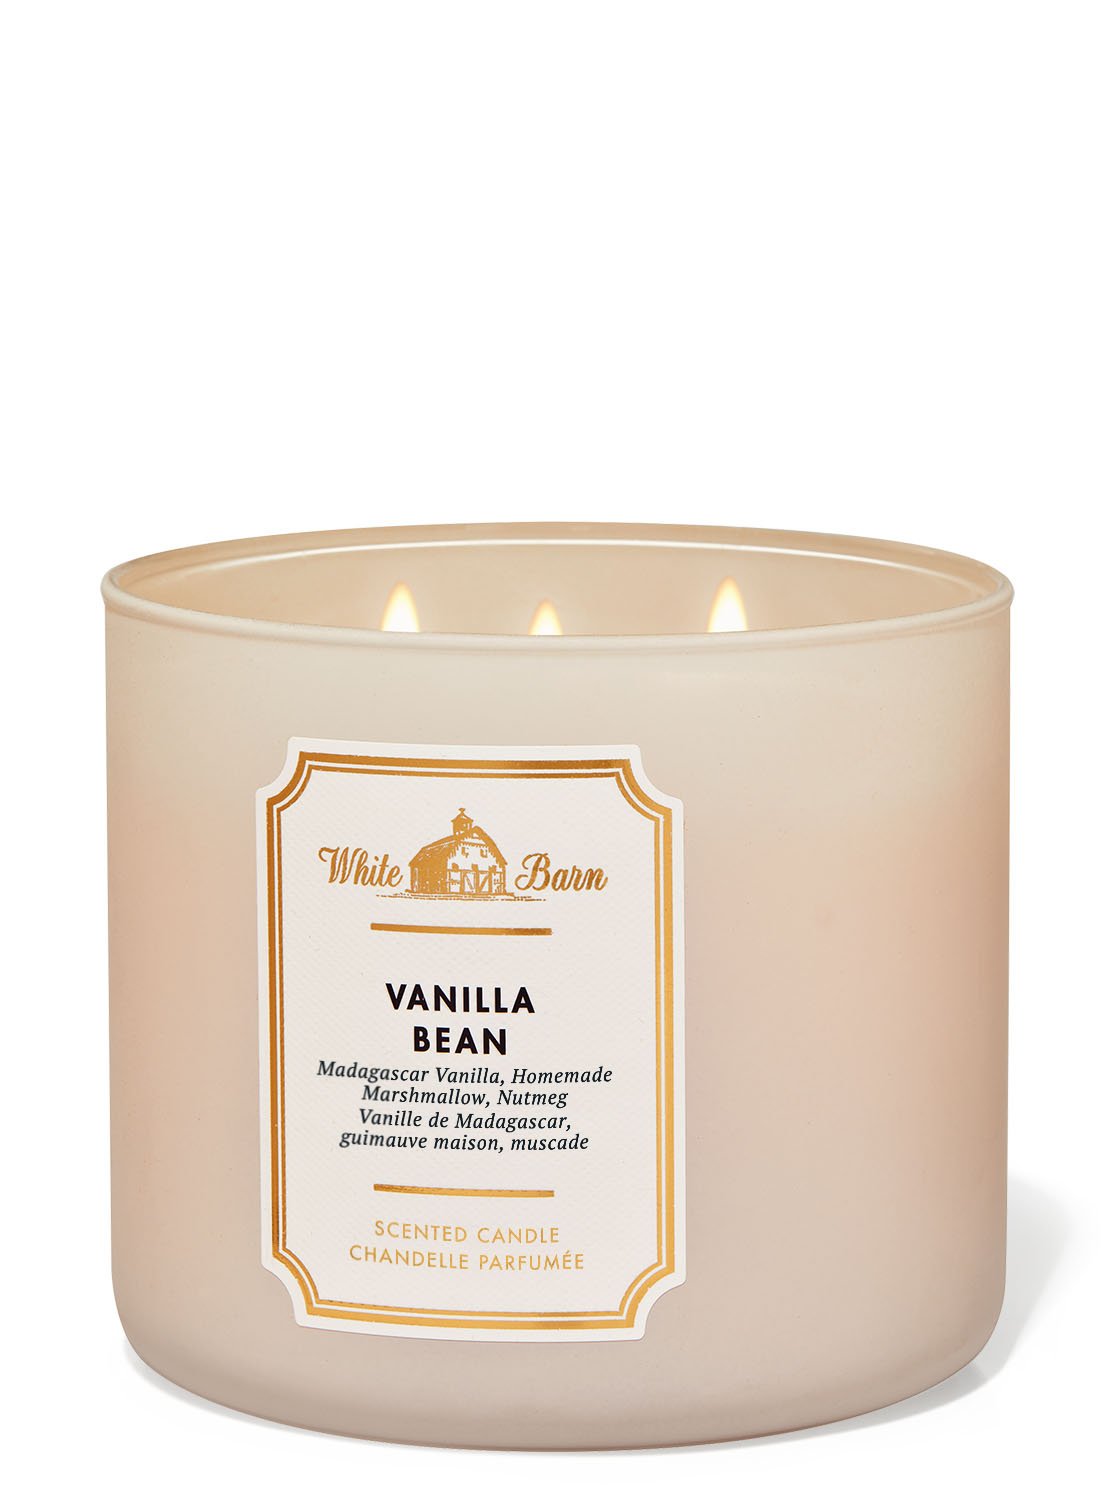 Vanilla Bean 3-Wick Candle | Bath and Body Works